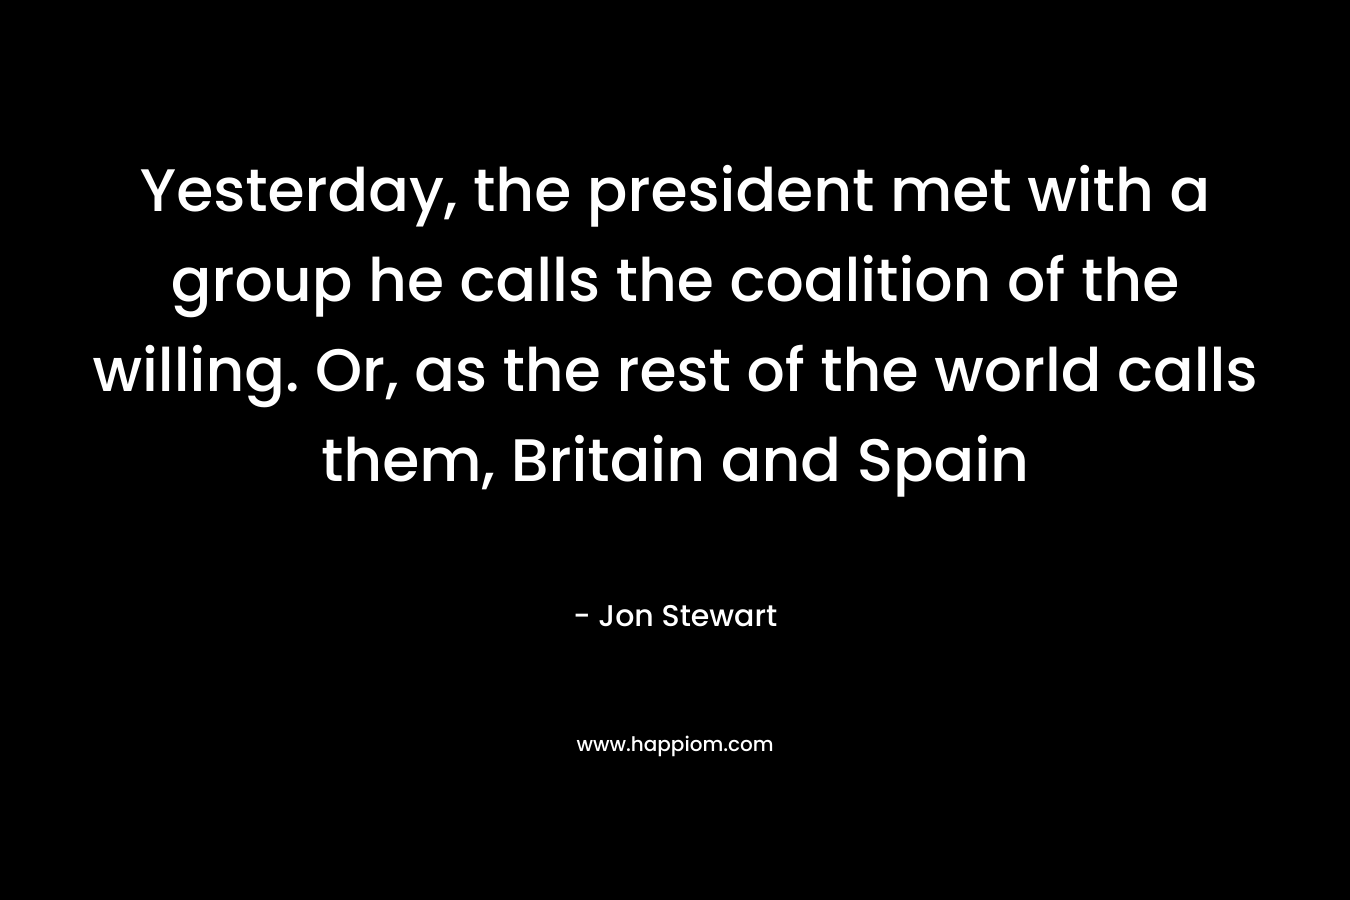 Yesterday, the president met with a group he calls the coalition of the willing. Or, as the rest of the world calls them, Britain and Spain